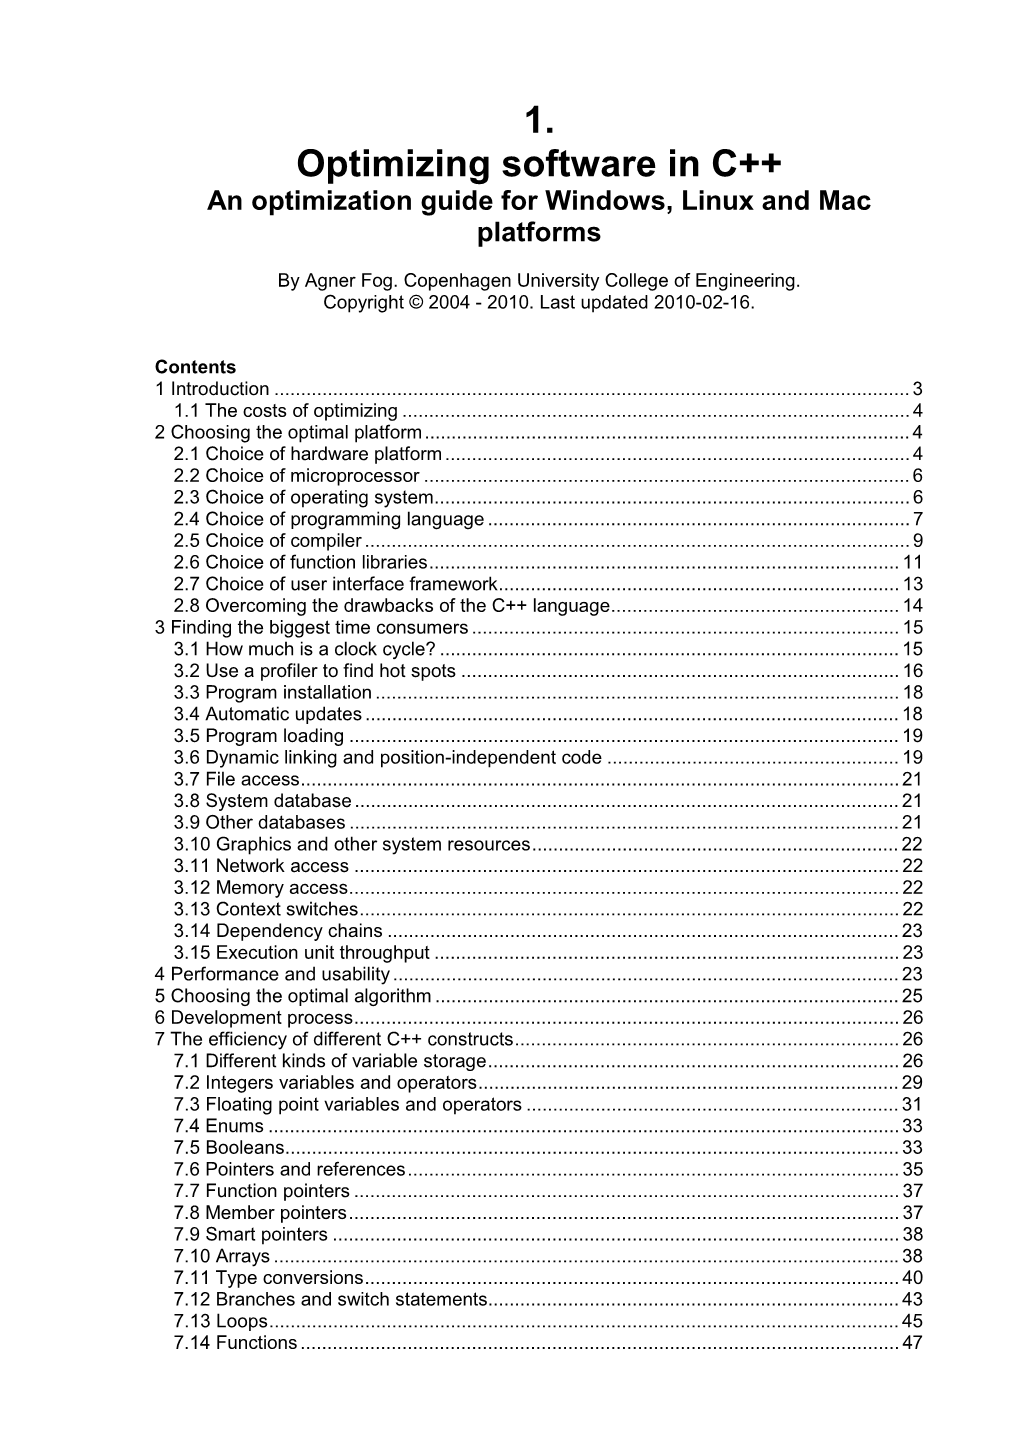 Optimizing Software in C++ an Optimization Guide for Windows, Linux and Mac Platforms